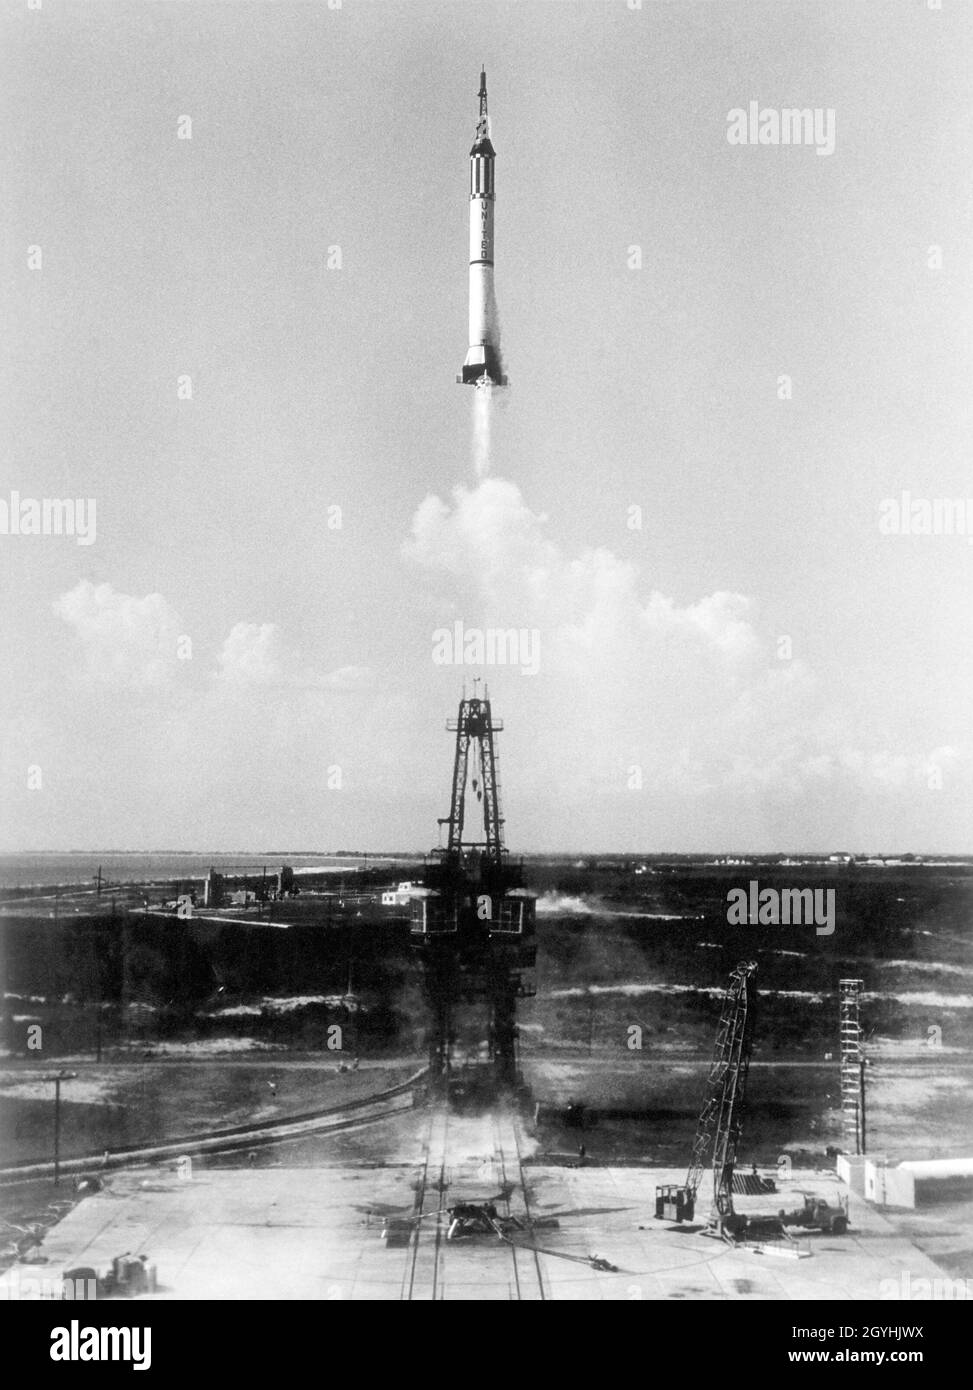 (5 May 1961) --- Launching of the Mercury-Redstone 3 (MR-3) spacecraft from Cape Canaveral on a suborbital mission -- the first U.S. manned spaceflight. Stock Photo